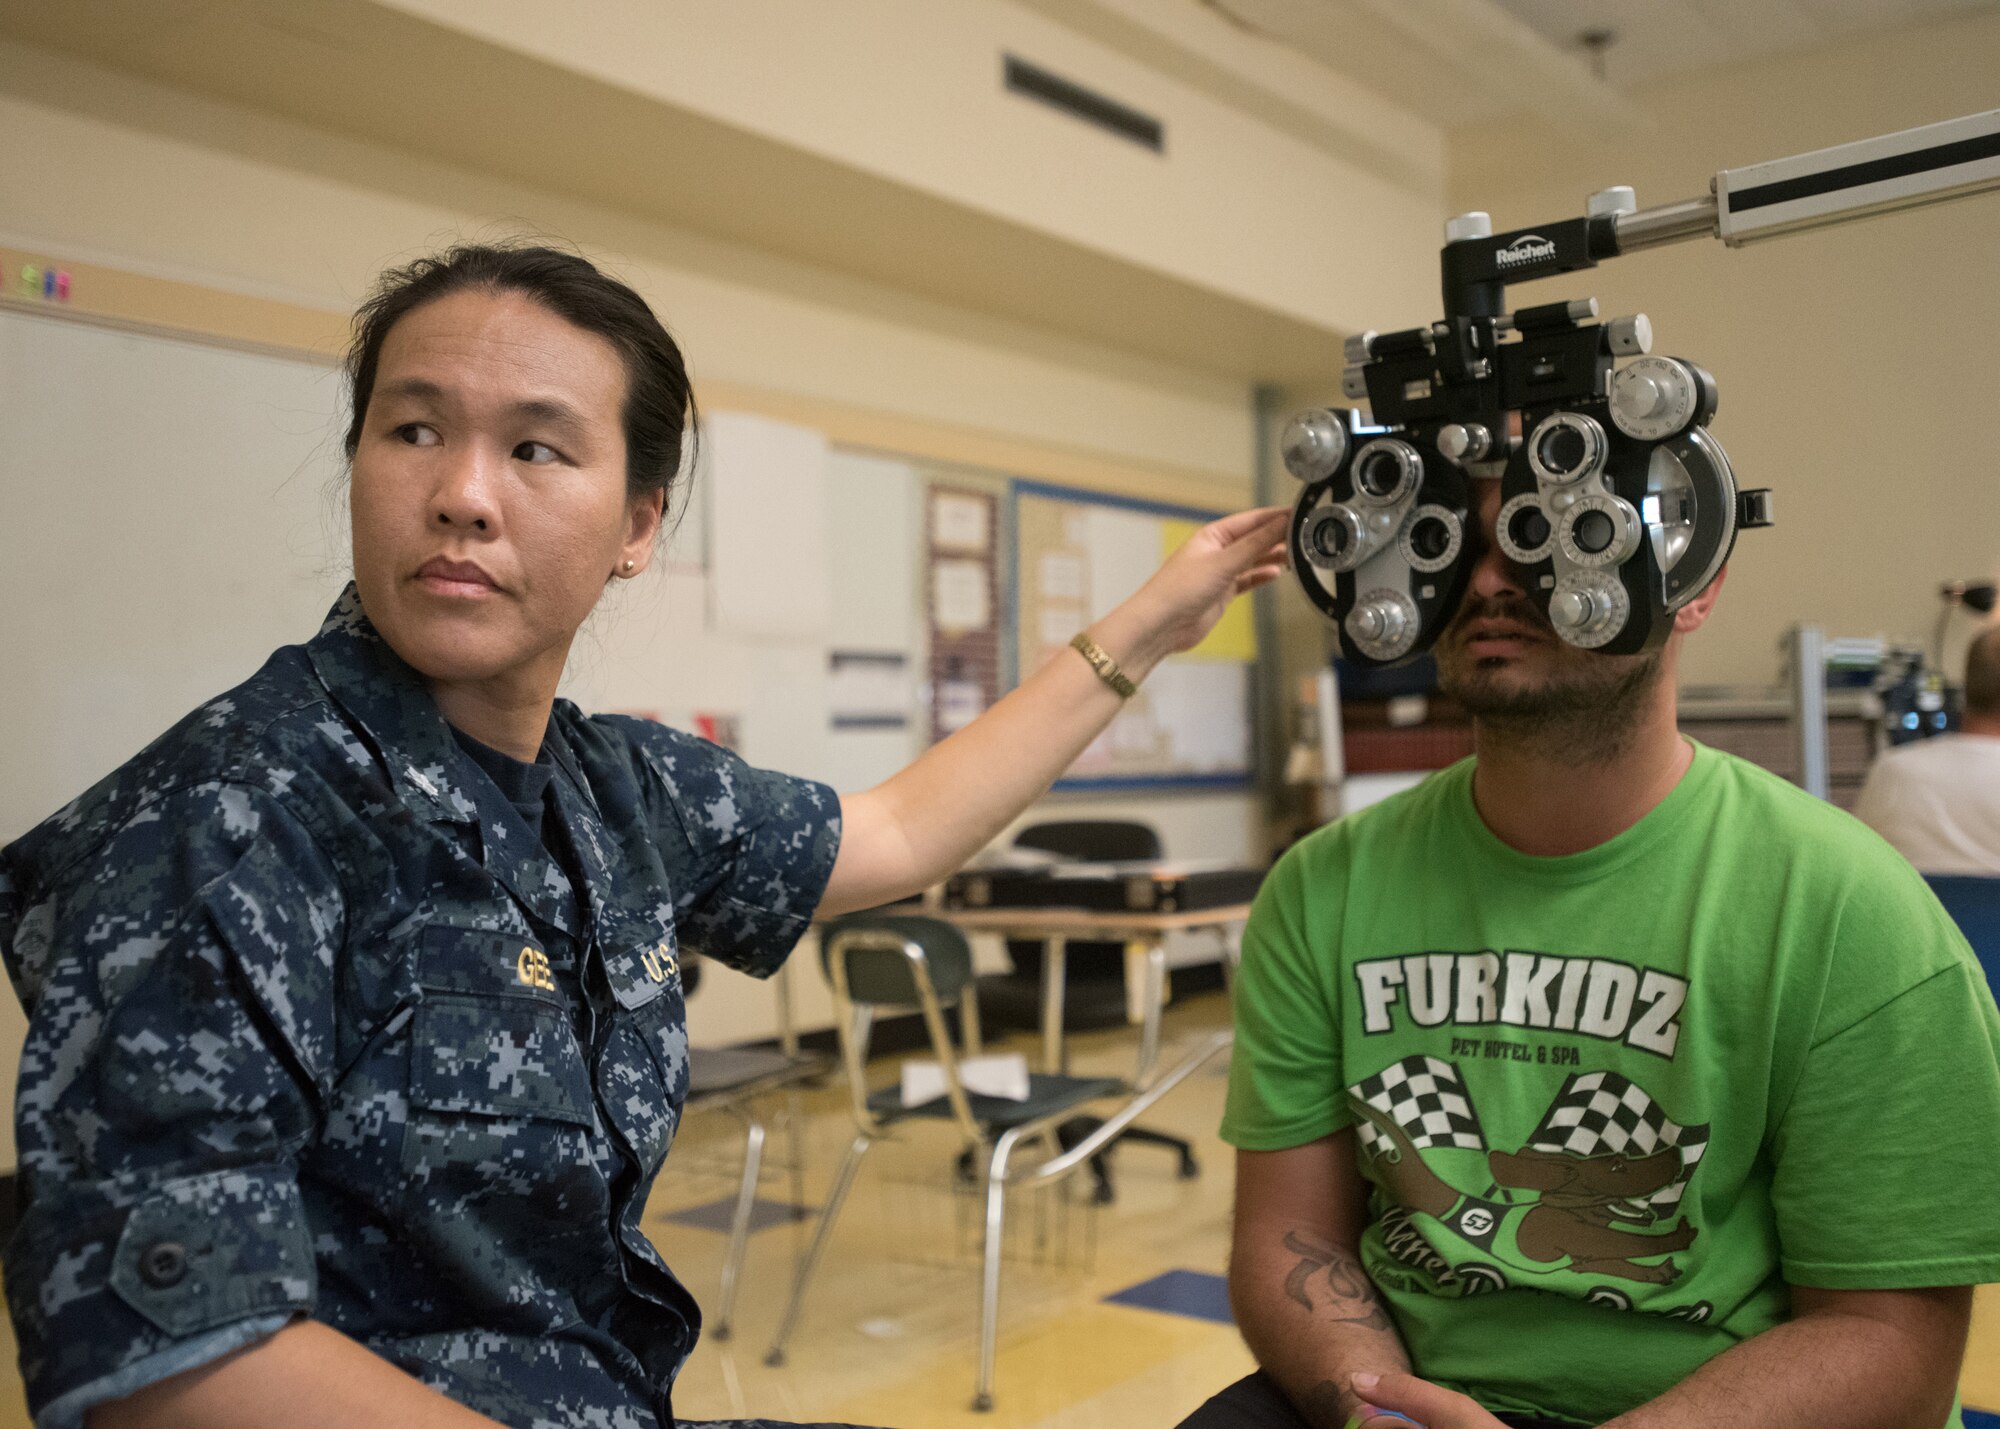 U.S. Navy Cmdr. Sharlene Gee, an optometrist with Expeditionary Medical Facility Camp Pendleton, performs a vision test for a Western Kentucky resident at Paducah Tilghman High School in Paducah, Ky., July 18, 2016, during Bluegrass Medical Innovative Readiness Training. The Kentucky Air National Guard, U.S. Navy Reserve and other military units are teaming with the Delta Regional Authority to offer medical and dental care at no cost to residents in three Western Kentucky locations from July 18 to 27 as part of the training event. (U.S. Air National Guard photo by Master Sgt. Phil Speck)